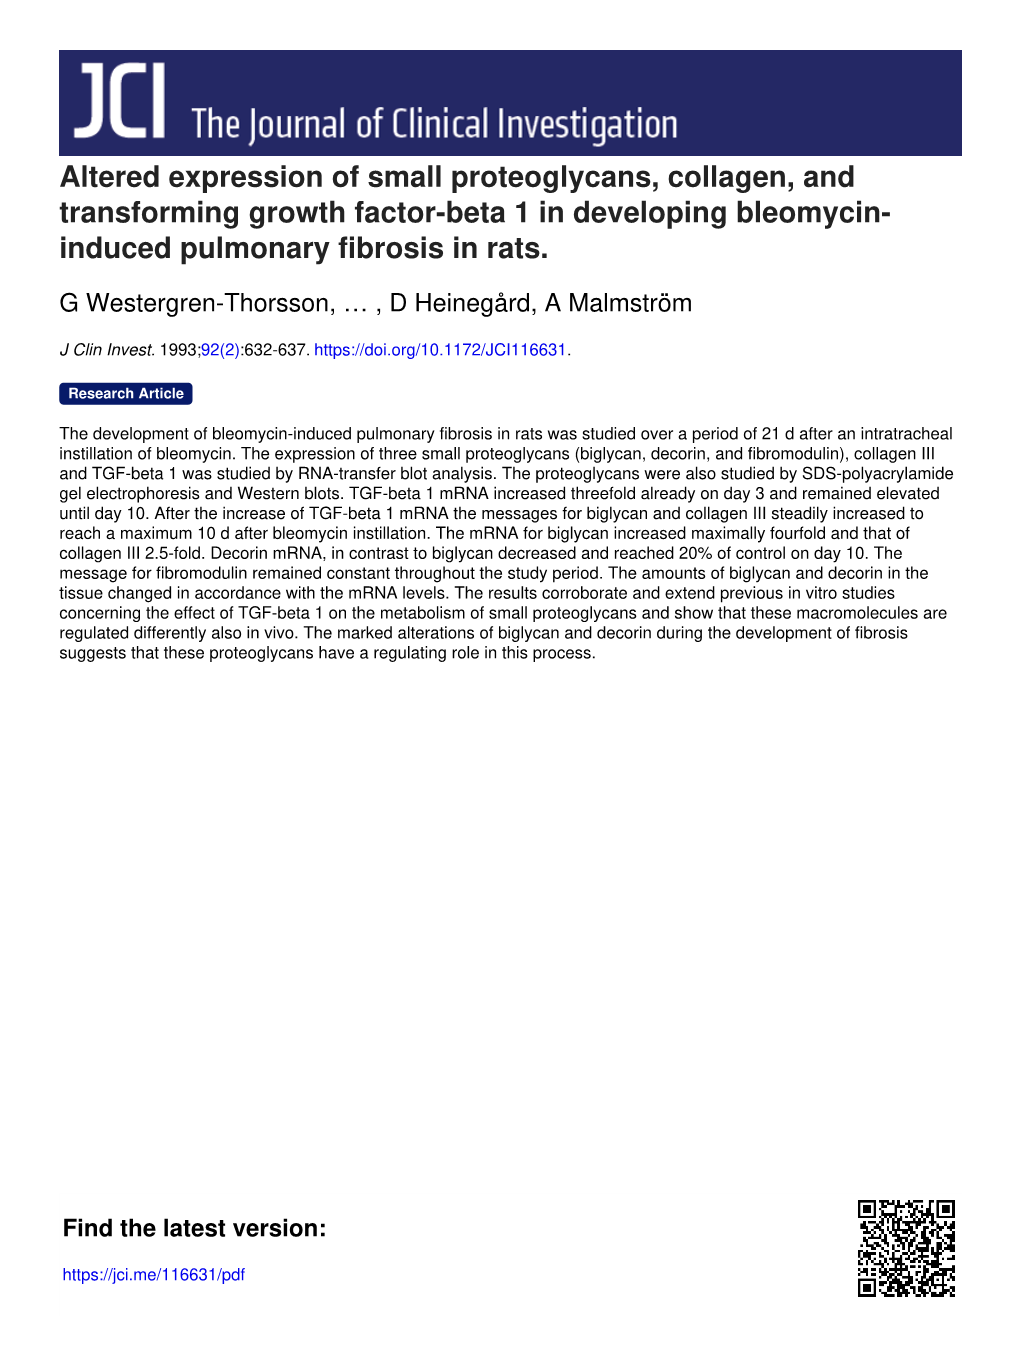 Altered Expression of Small Proteoglycans, Collagen, and Transforming Growth Factor-Beta 1 in Developing Bleomycin- Induced Pulmonary Fibrosis in Rats